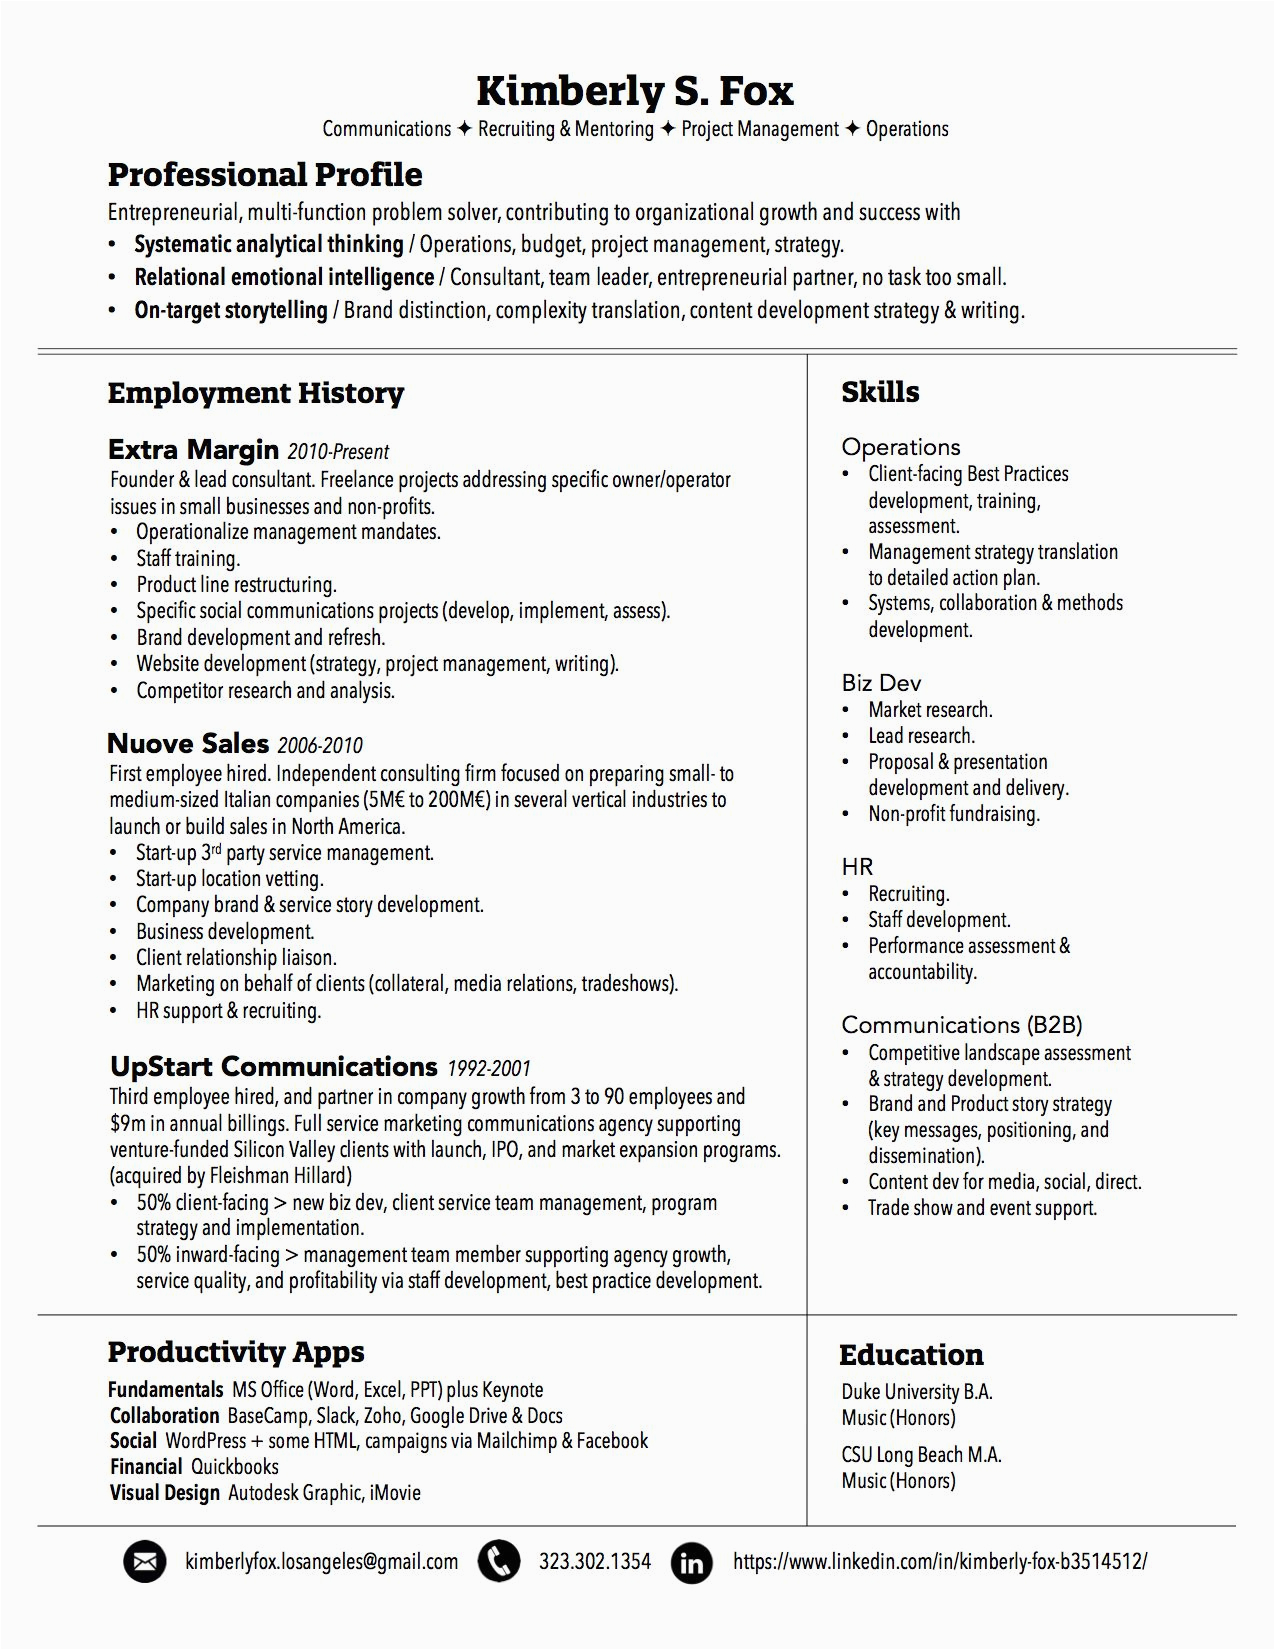 Corporate Training and Emotional Intelligence Sample Resume Pin by Hanna Luise Von Falkenstein On Job Search